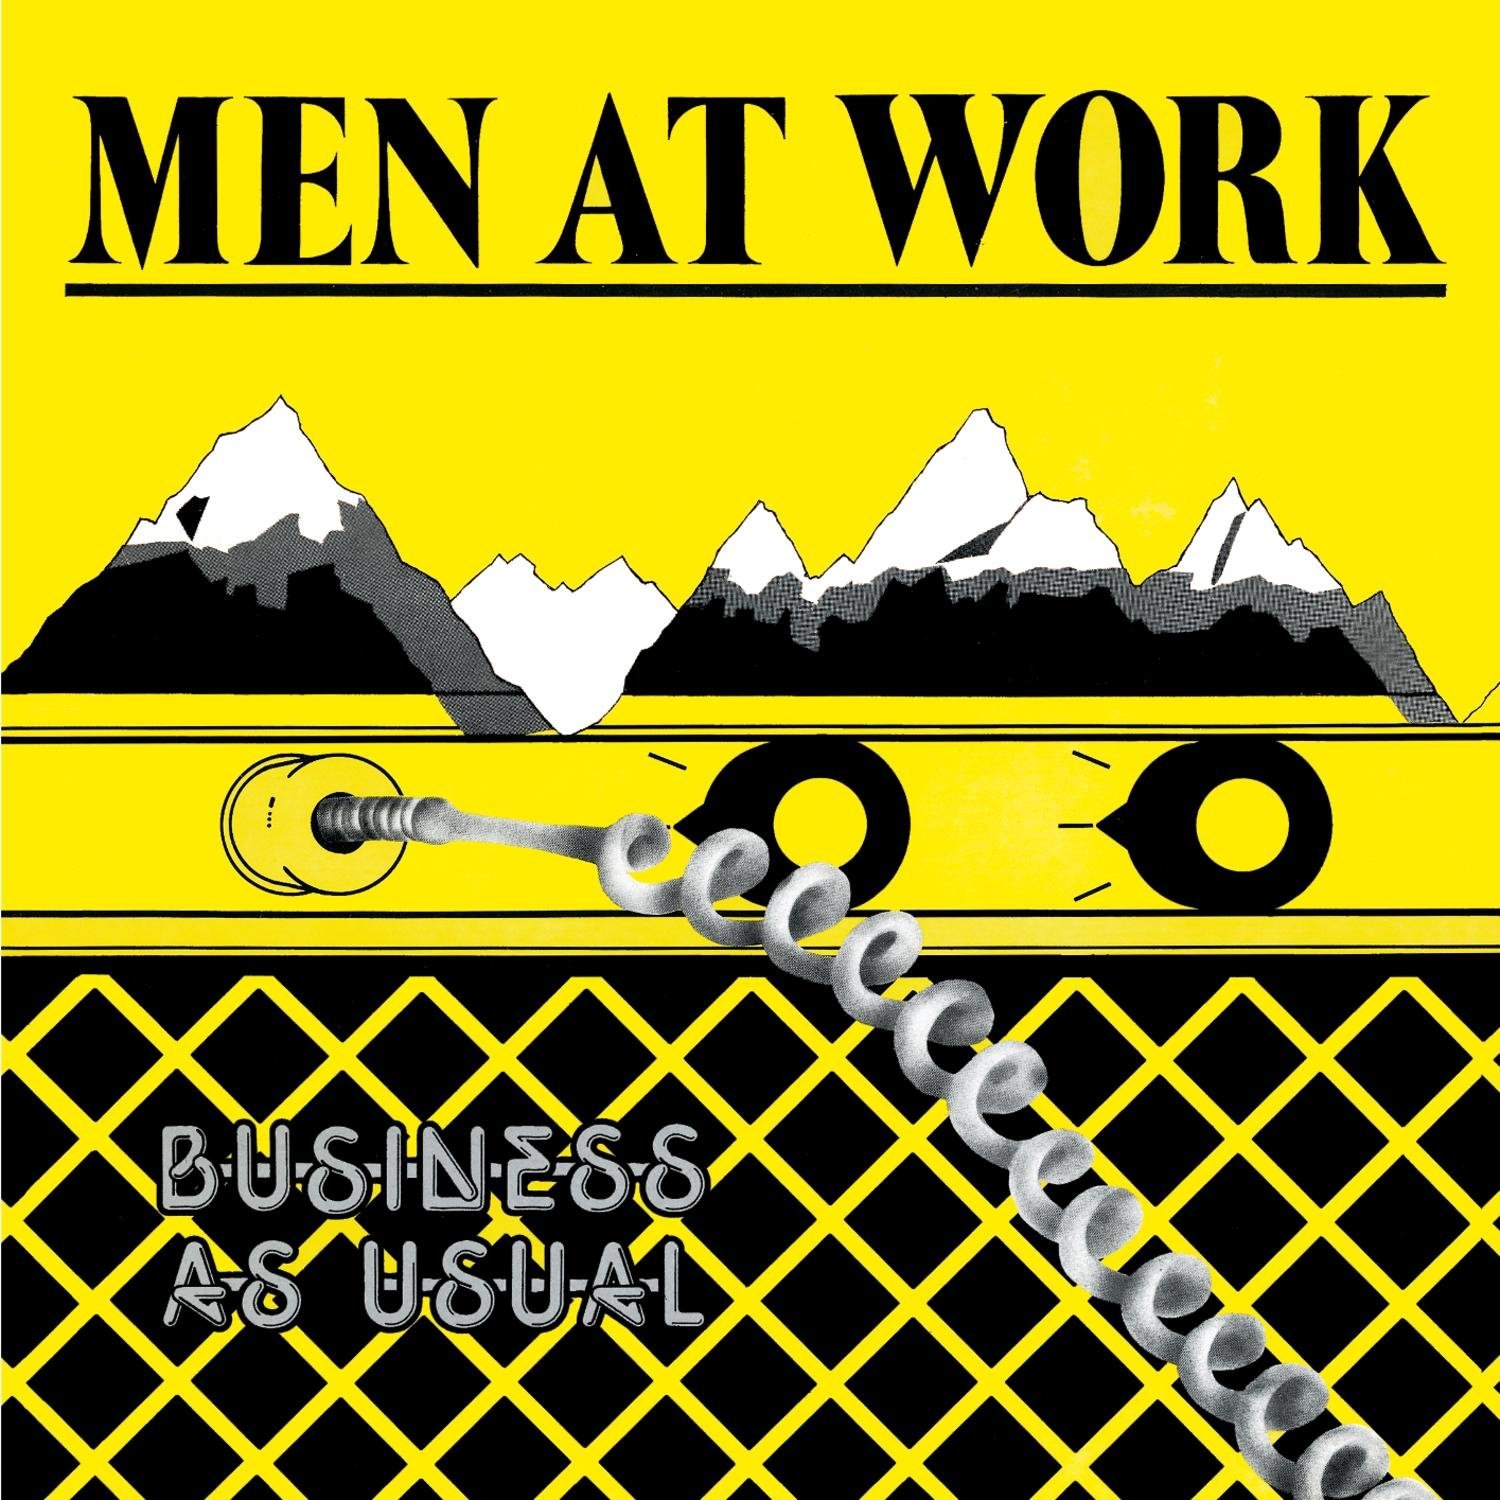 Men At Work - Business As Usual - Colin Hay